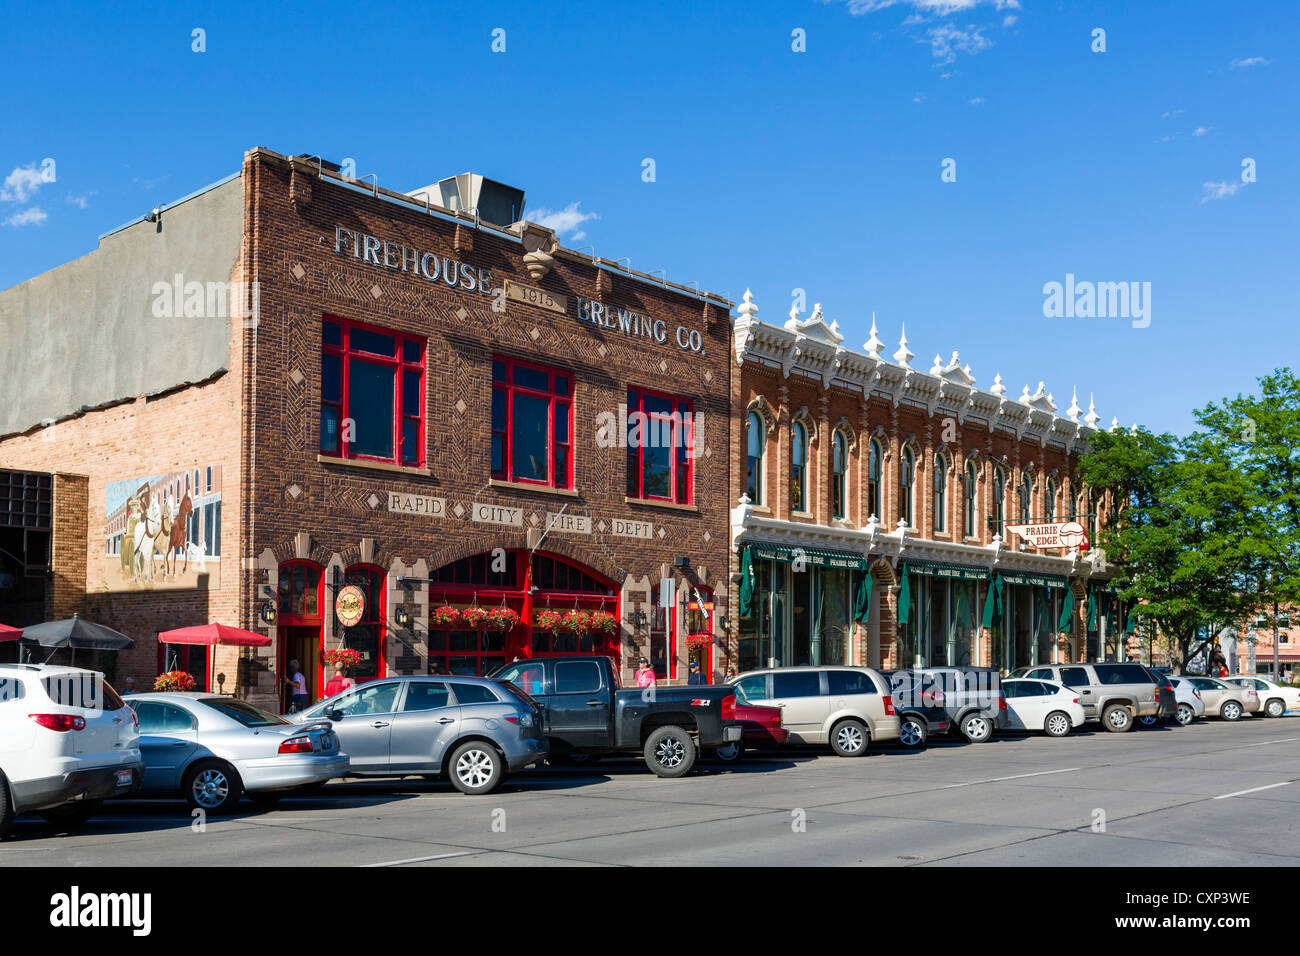 The Firehouse Brewing Co bar and brewery on Main Street in downtown Rapid City, South Dakota, USA Stock Photo